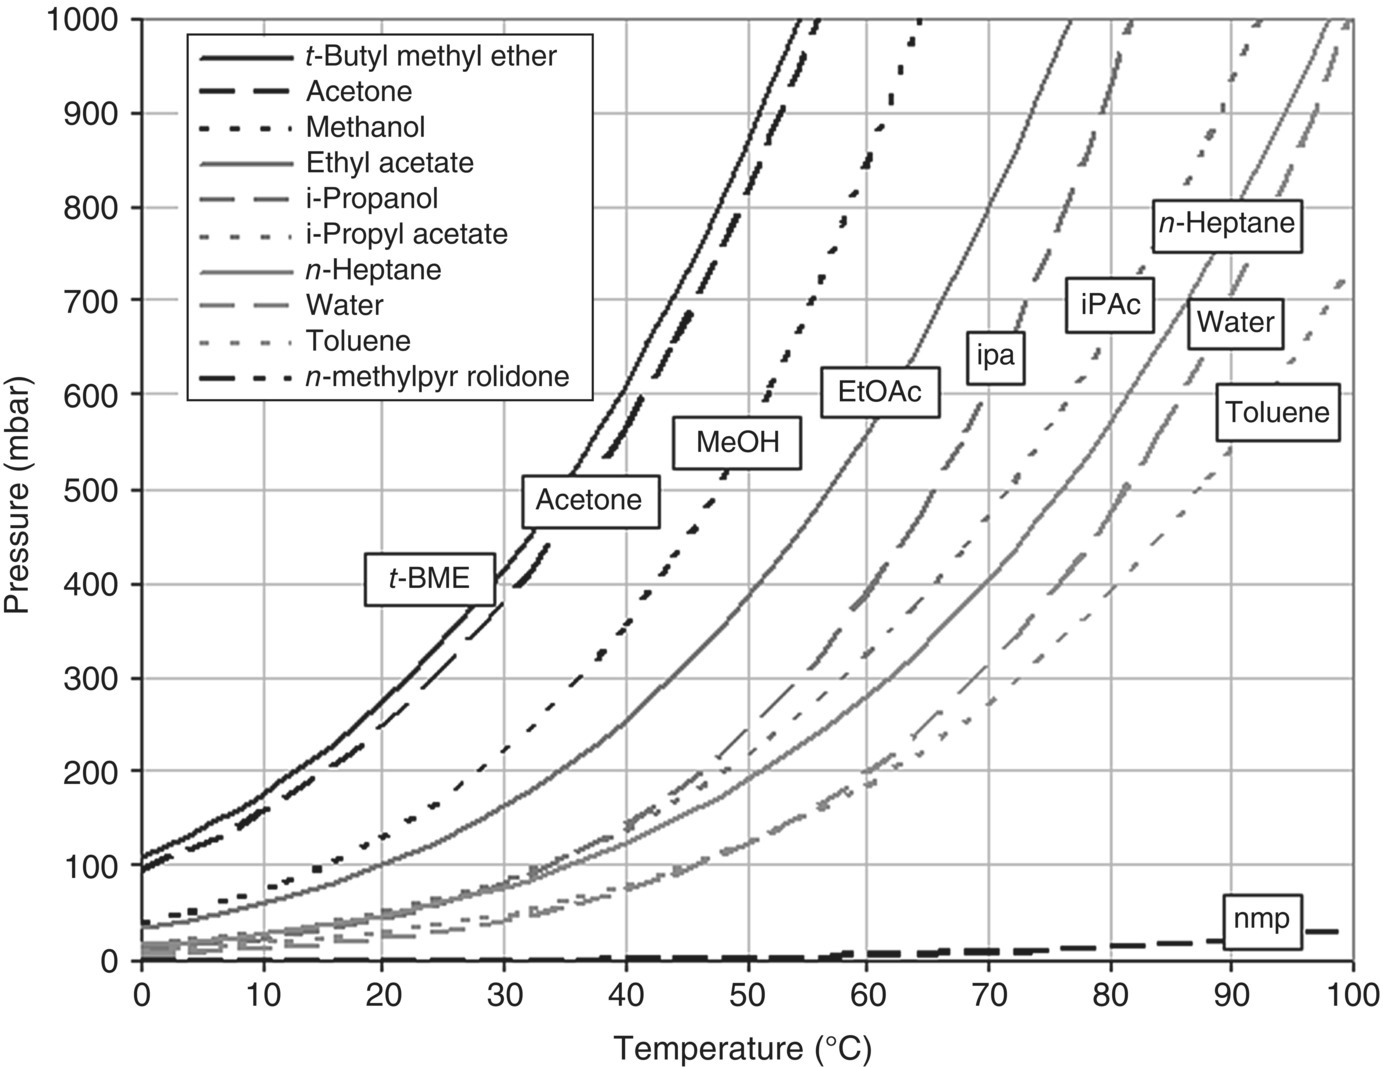 Pressure (mbar) vs. temperature (°C) displaying 10 discrete ascending curves labeled t=BME, acetone, MeOH, EtOAc, ipa, iPAc, n-heptane, water, toluene, and nmp.